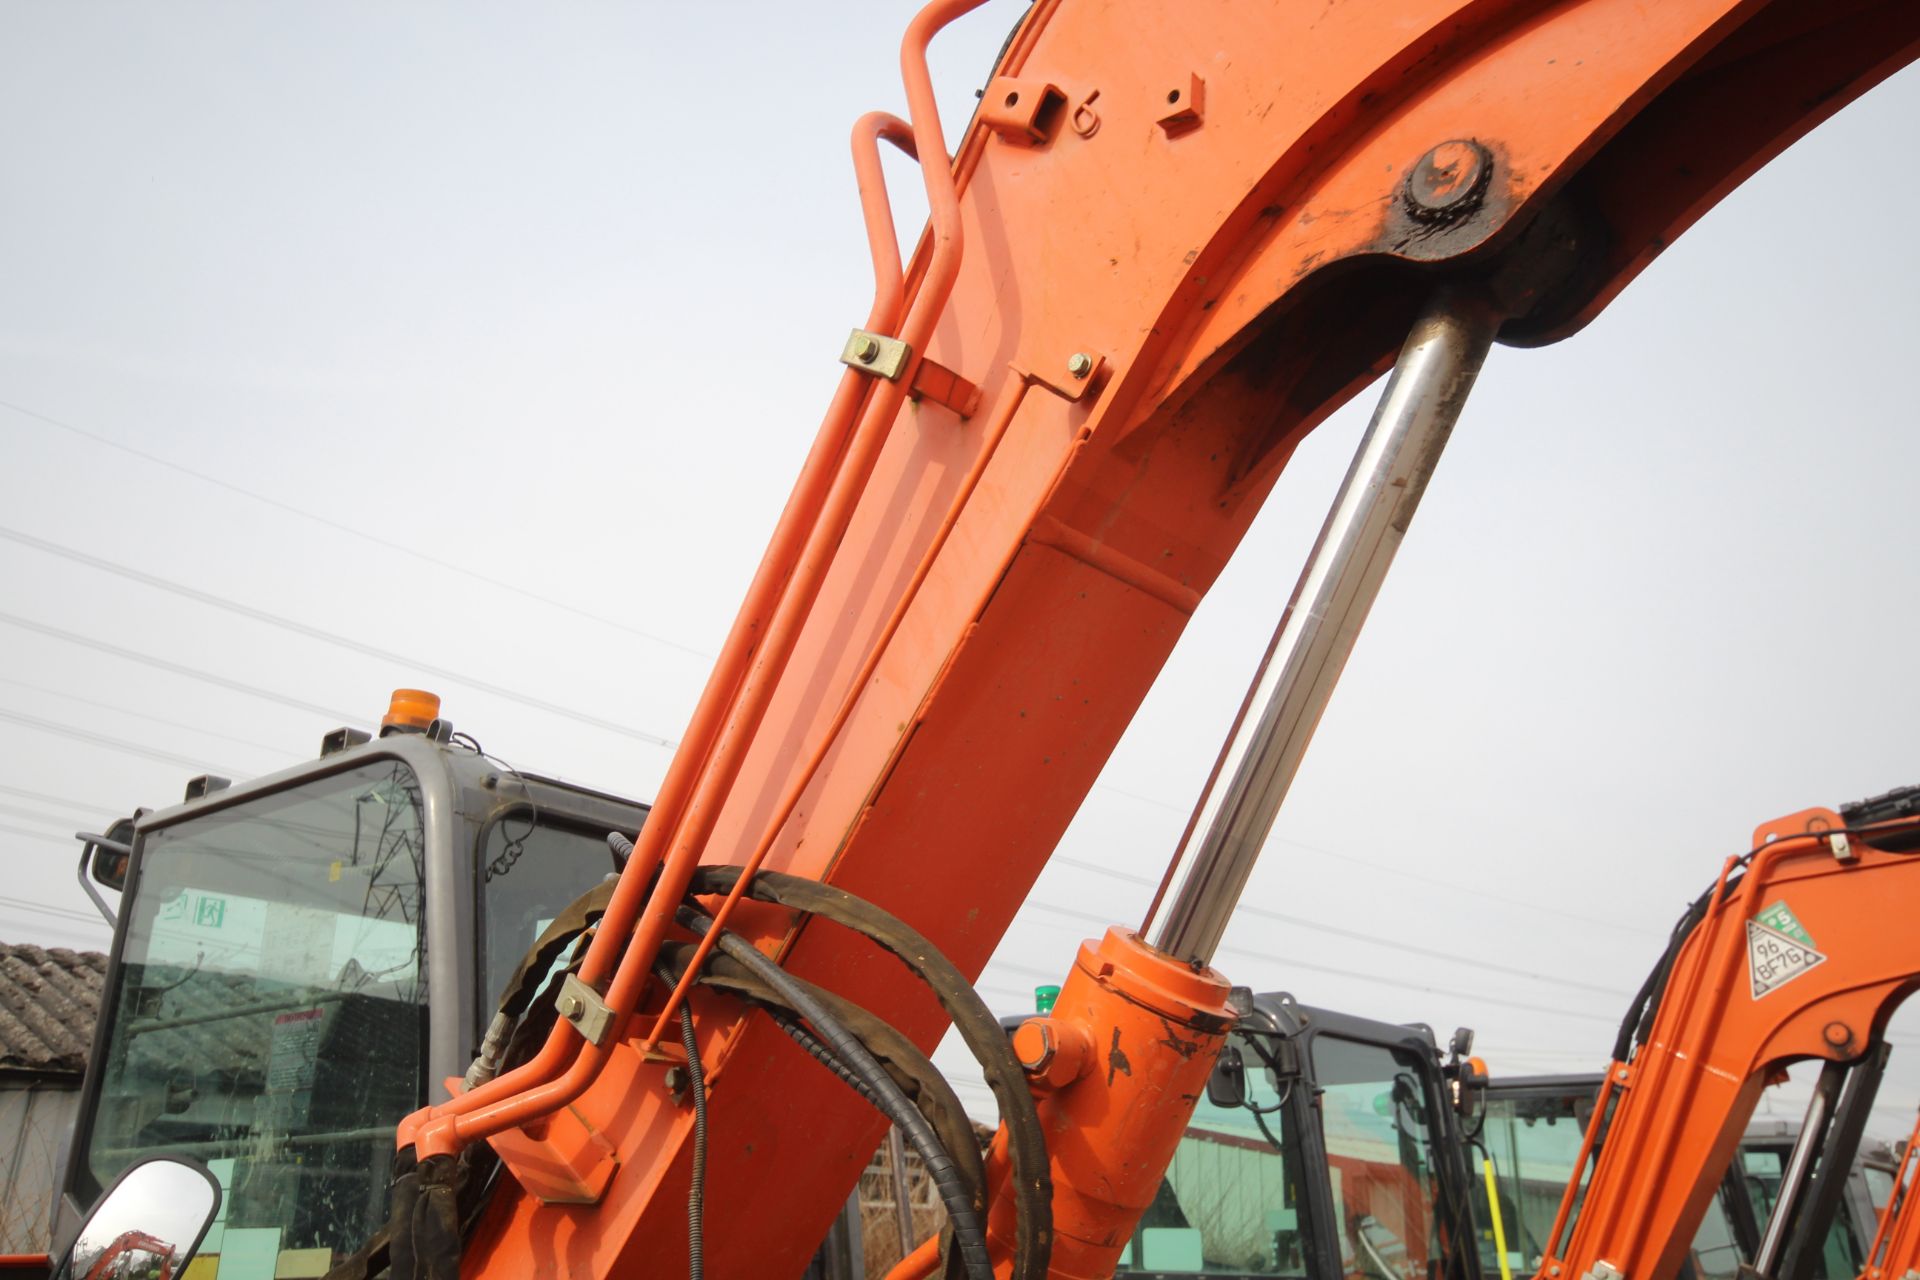 Hitachi Z-Axis 85-USB LC-3 8.5T rubber track excavator. 2012. 7,217 hours. Serial number HCM - Image 12 of 71